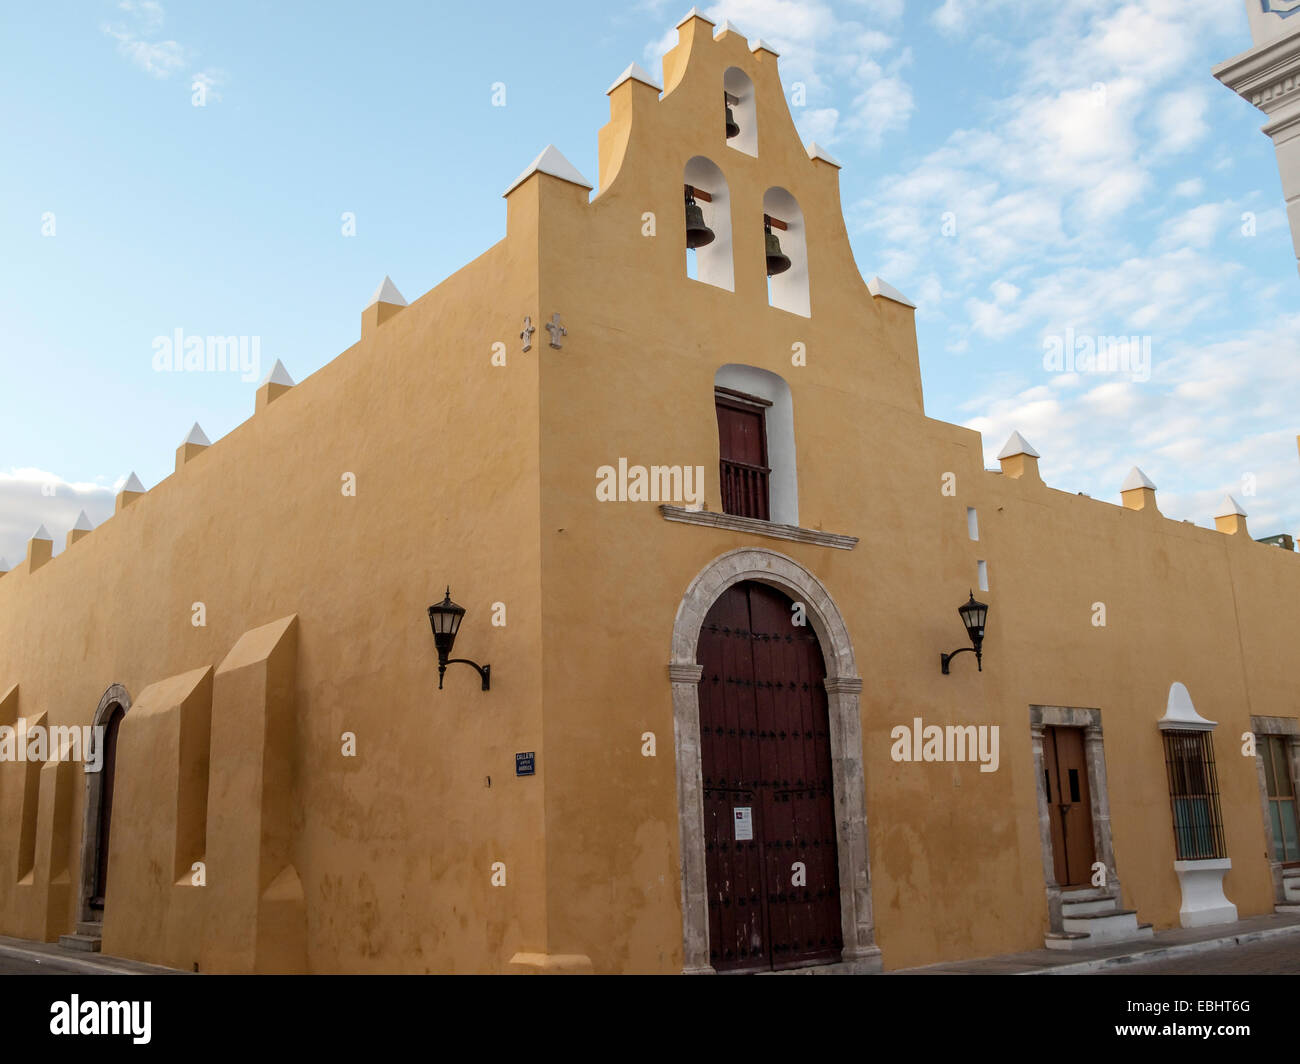 Corner view of 16th century Iglesia de San Francisco Church with ocher colored walls, red arched front door, three church bells  Campeche, MX. Stock Photo